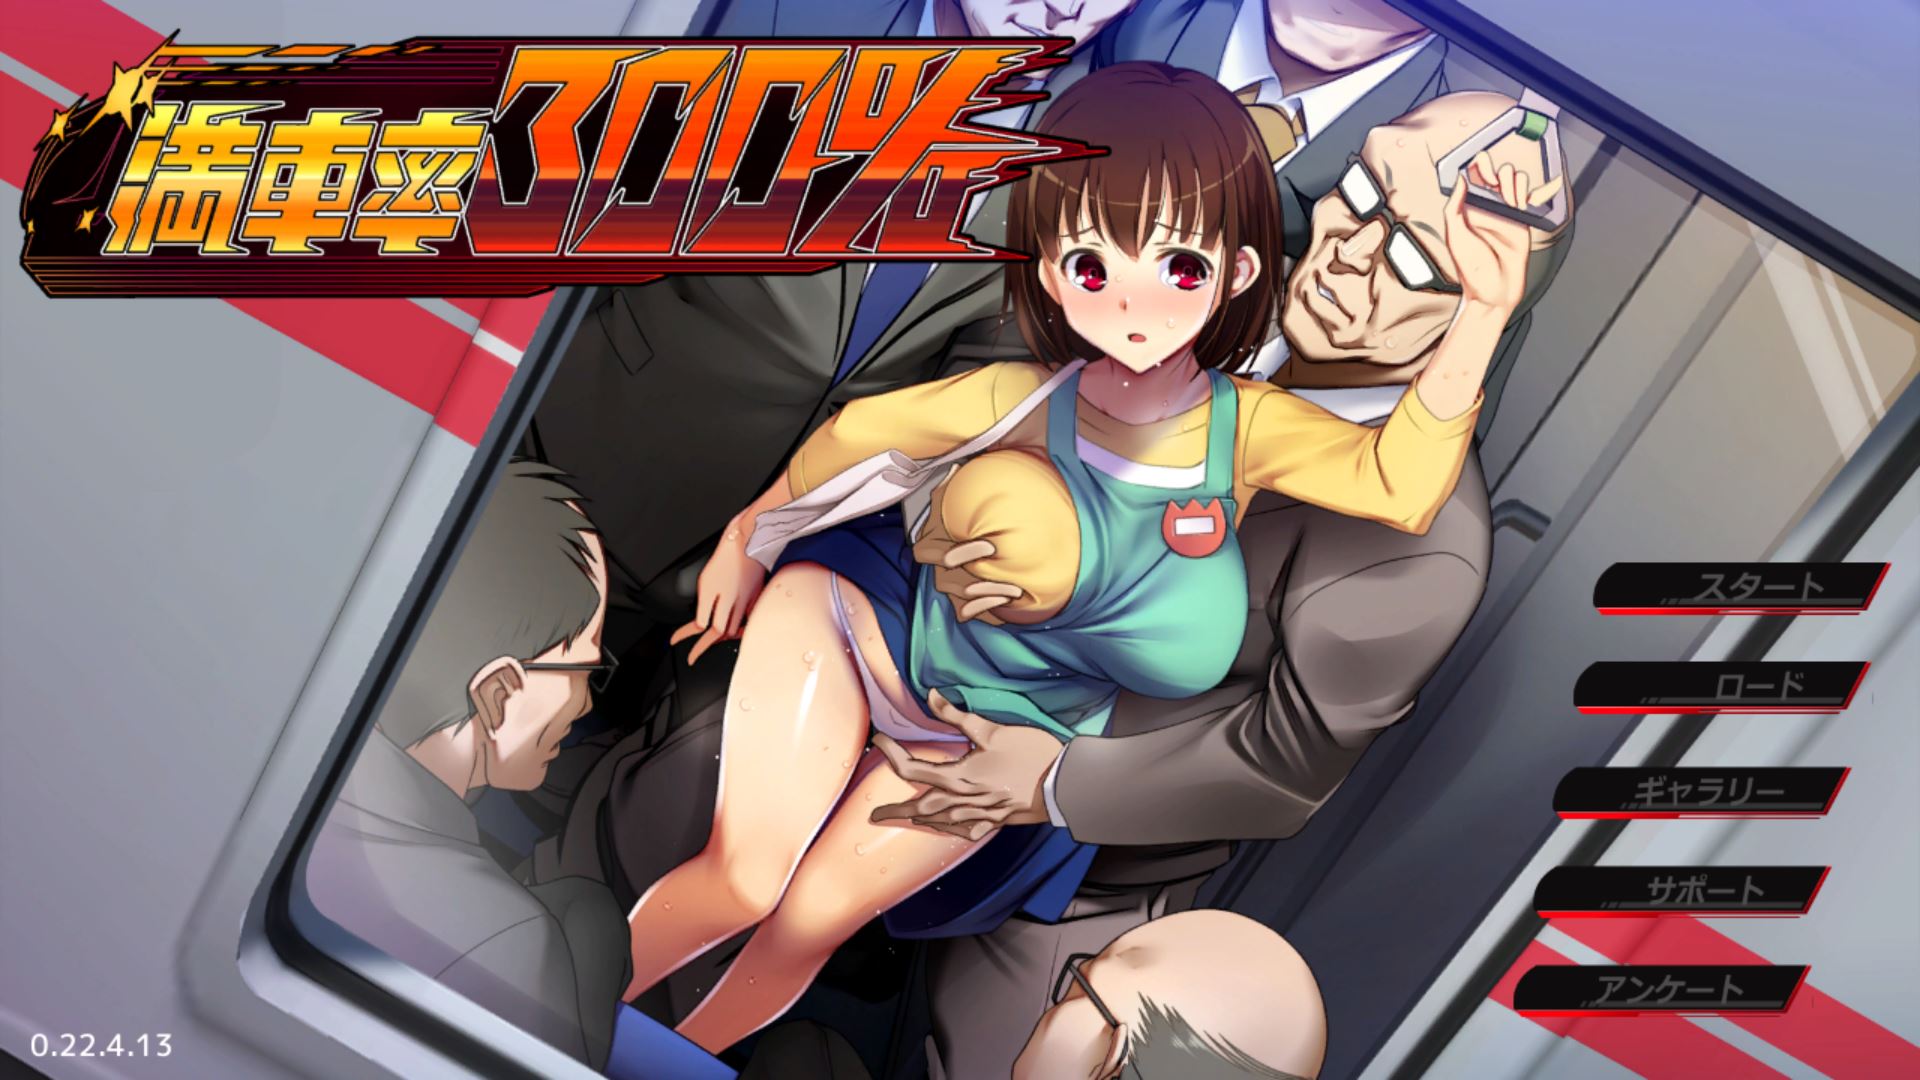 Full car rate 300% porn xxx game download cover